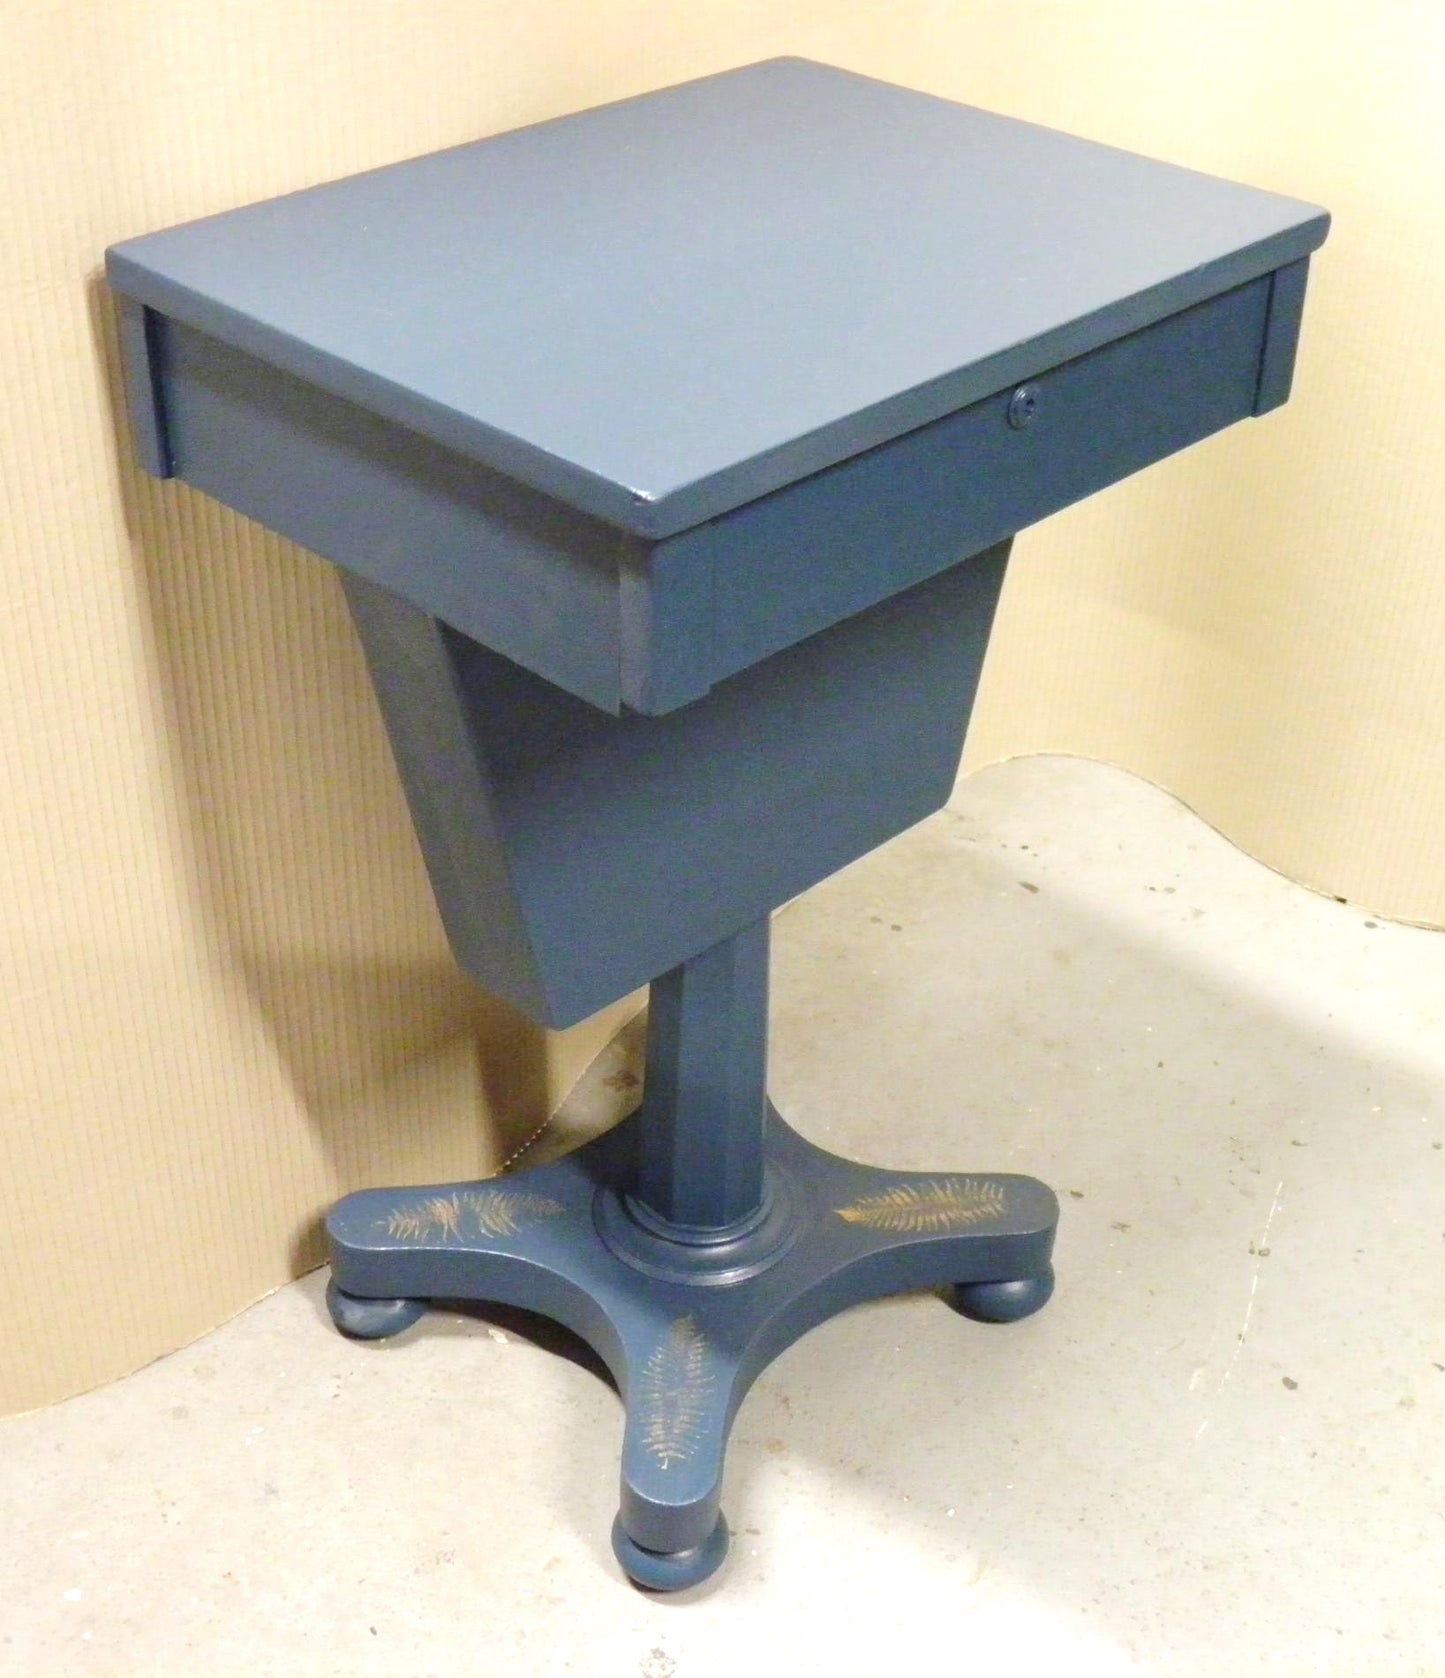 A 19th Century Upcycled Work Table / Lamp Table